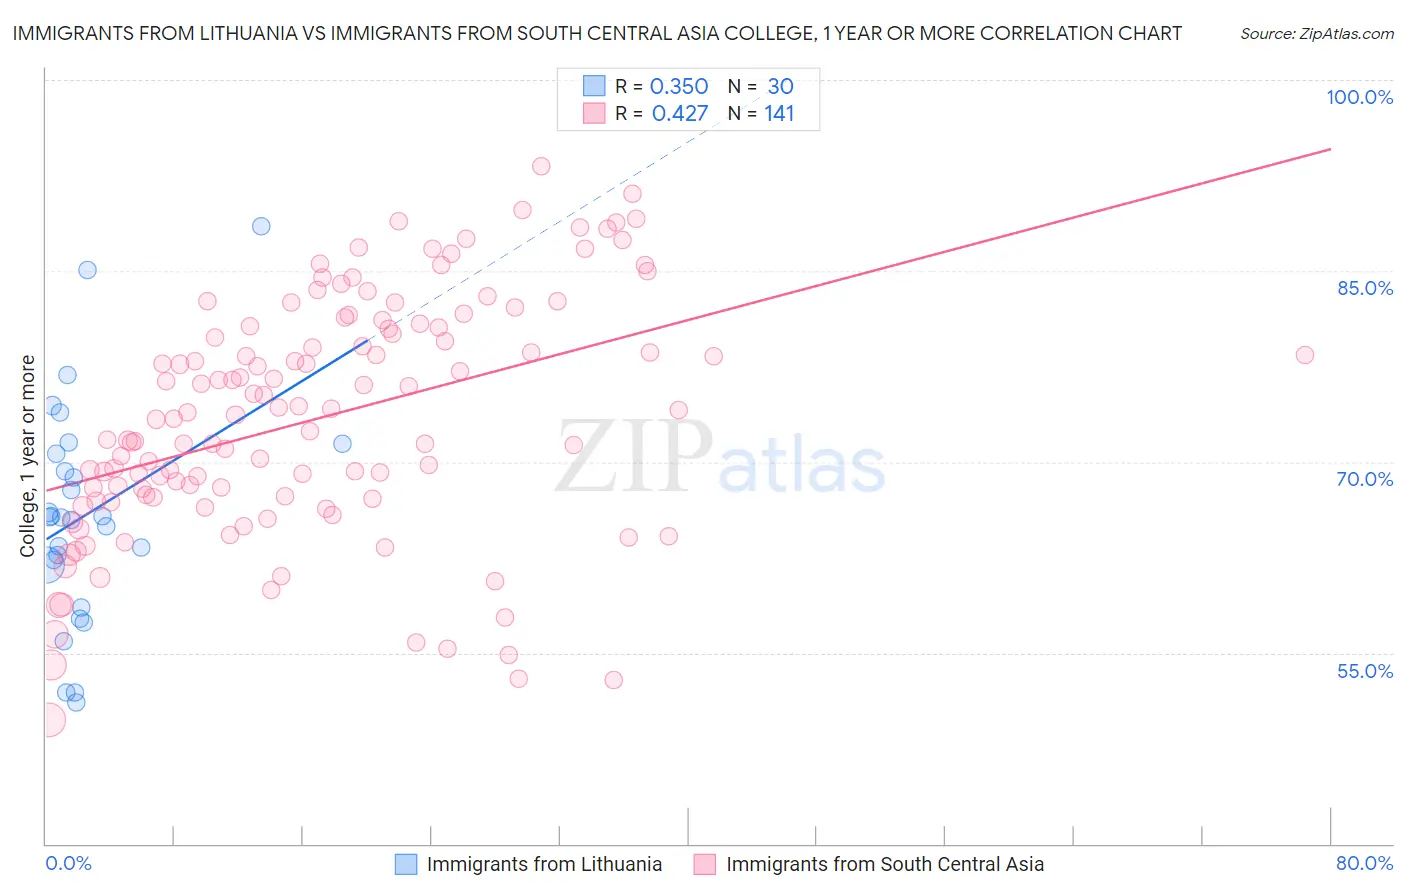 Immigrants from Lithuania vs Immigrants from South Central Asia College, 1 year or more